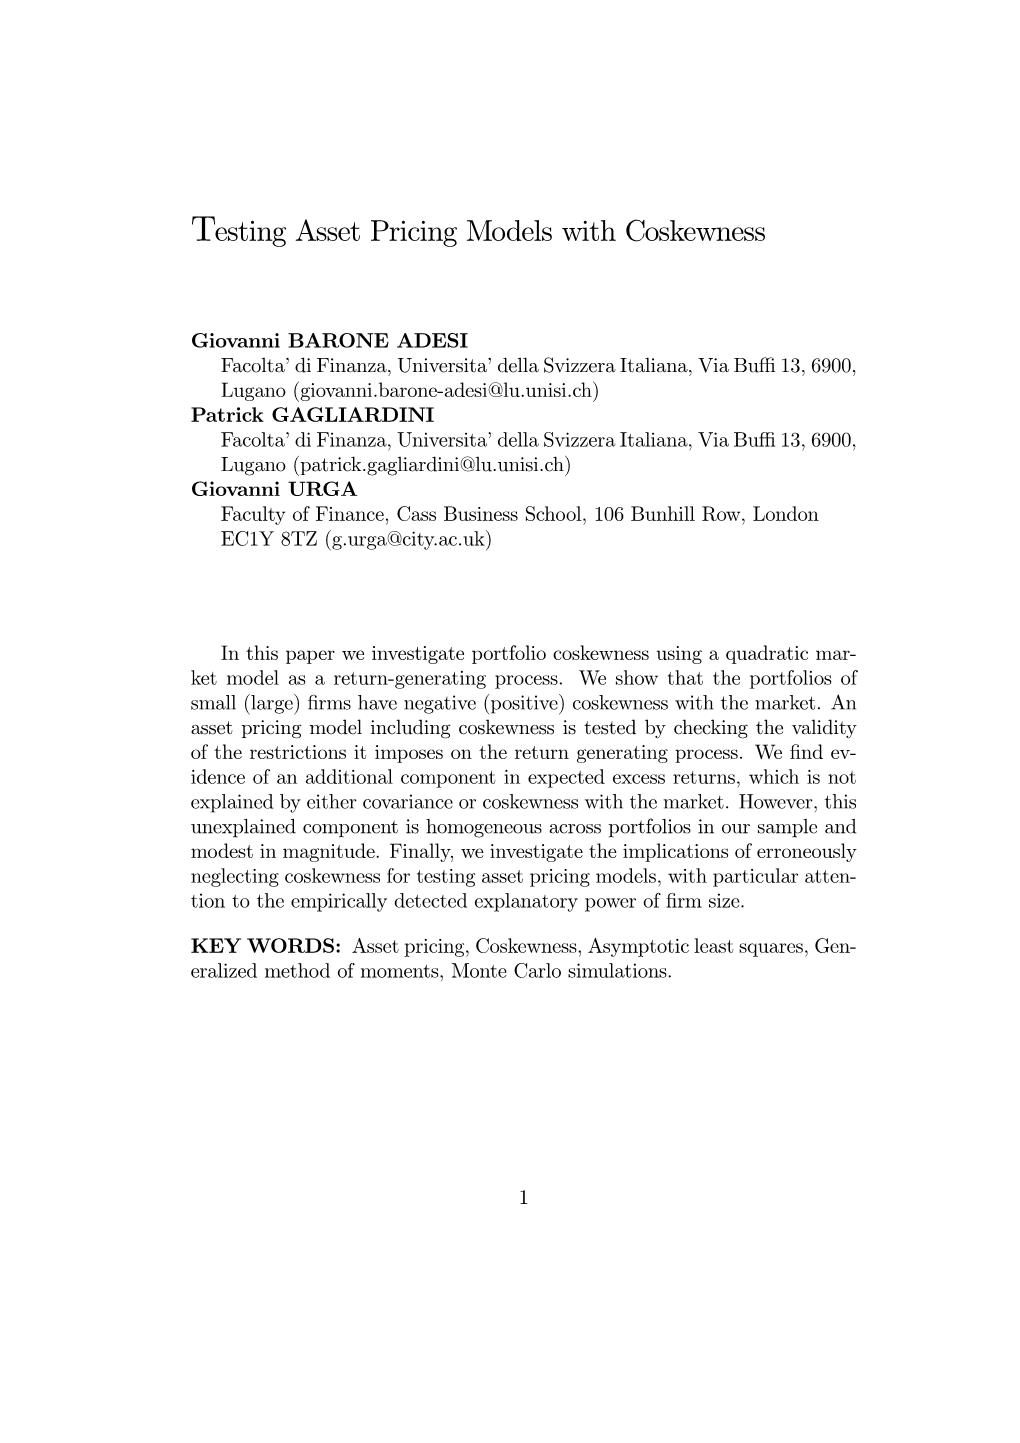 Testing Asset Pricing Models with Coskewness